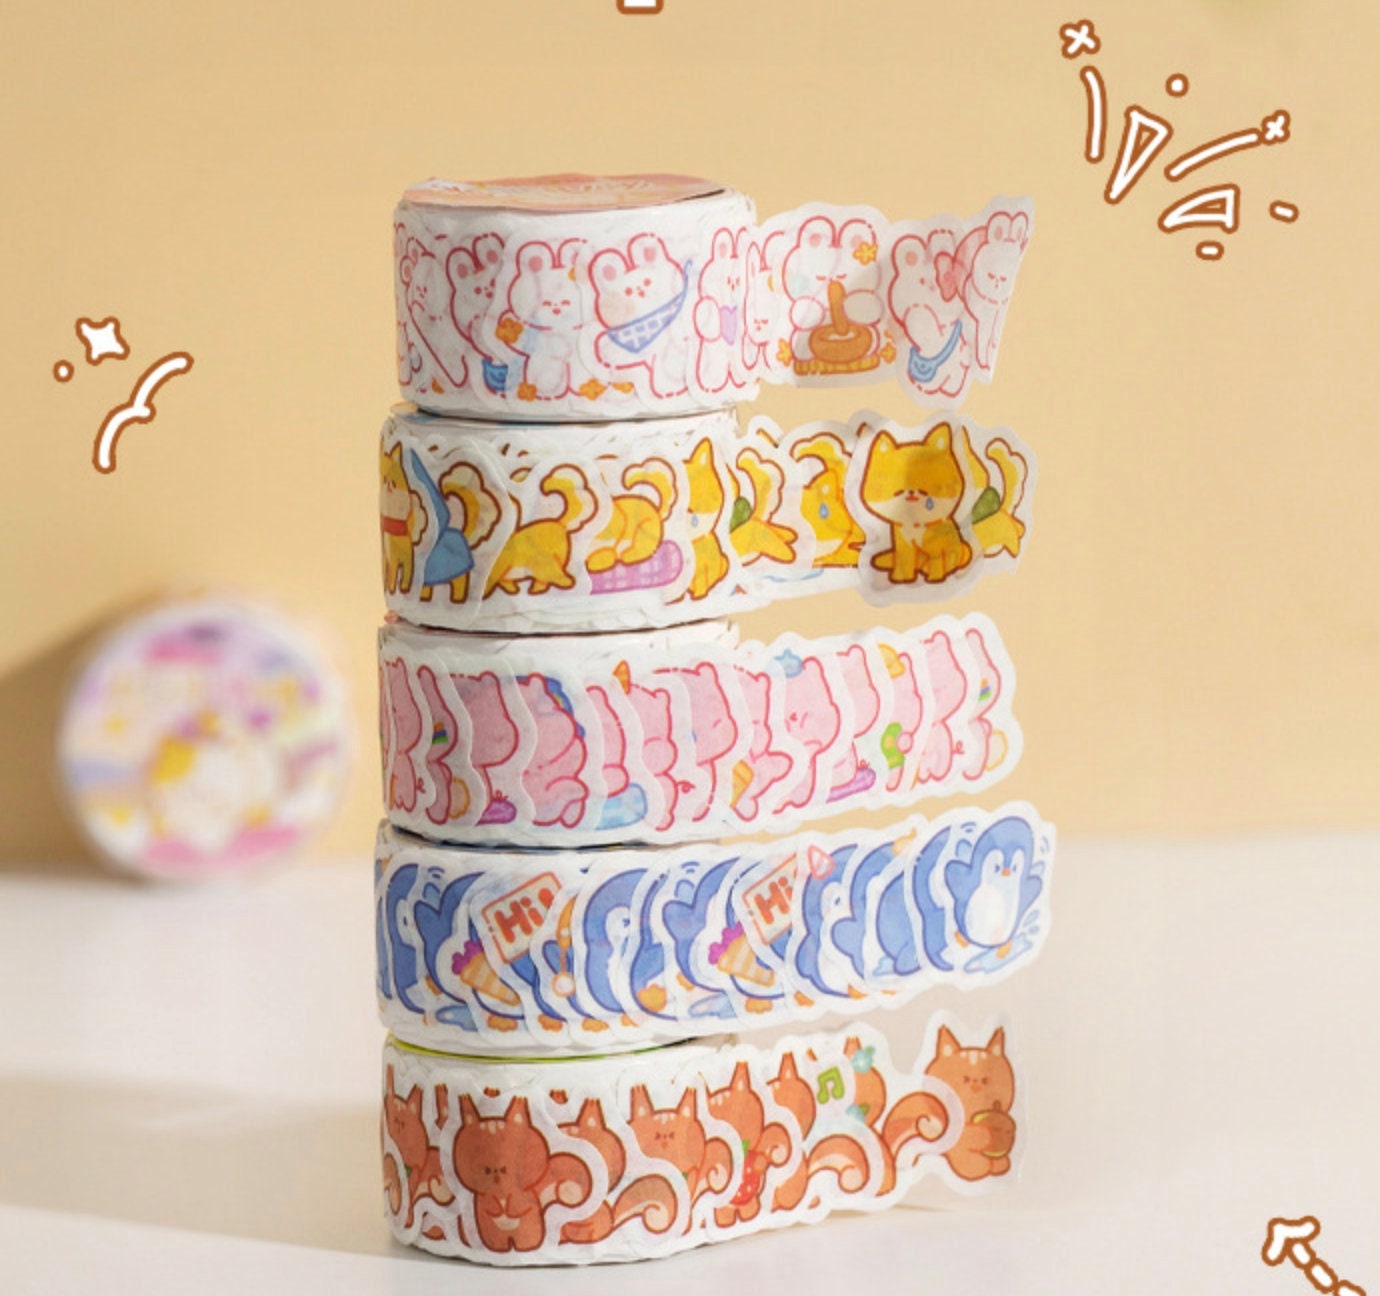 Washi Tape Sticker Sheets, Floral Tropical Washi Stickers, Cat and Dog  Washi Sticker, Fun Washi Sticker Sheets BBB Supplies R-RGW-SW 